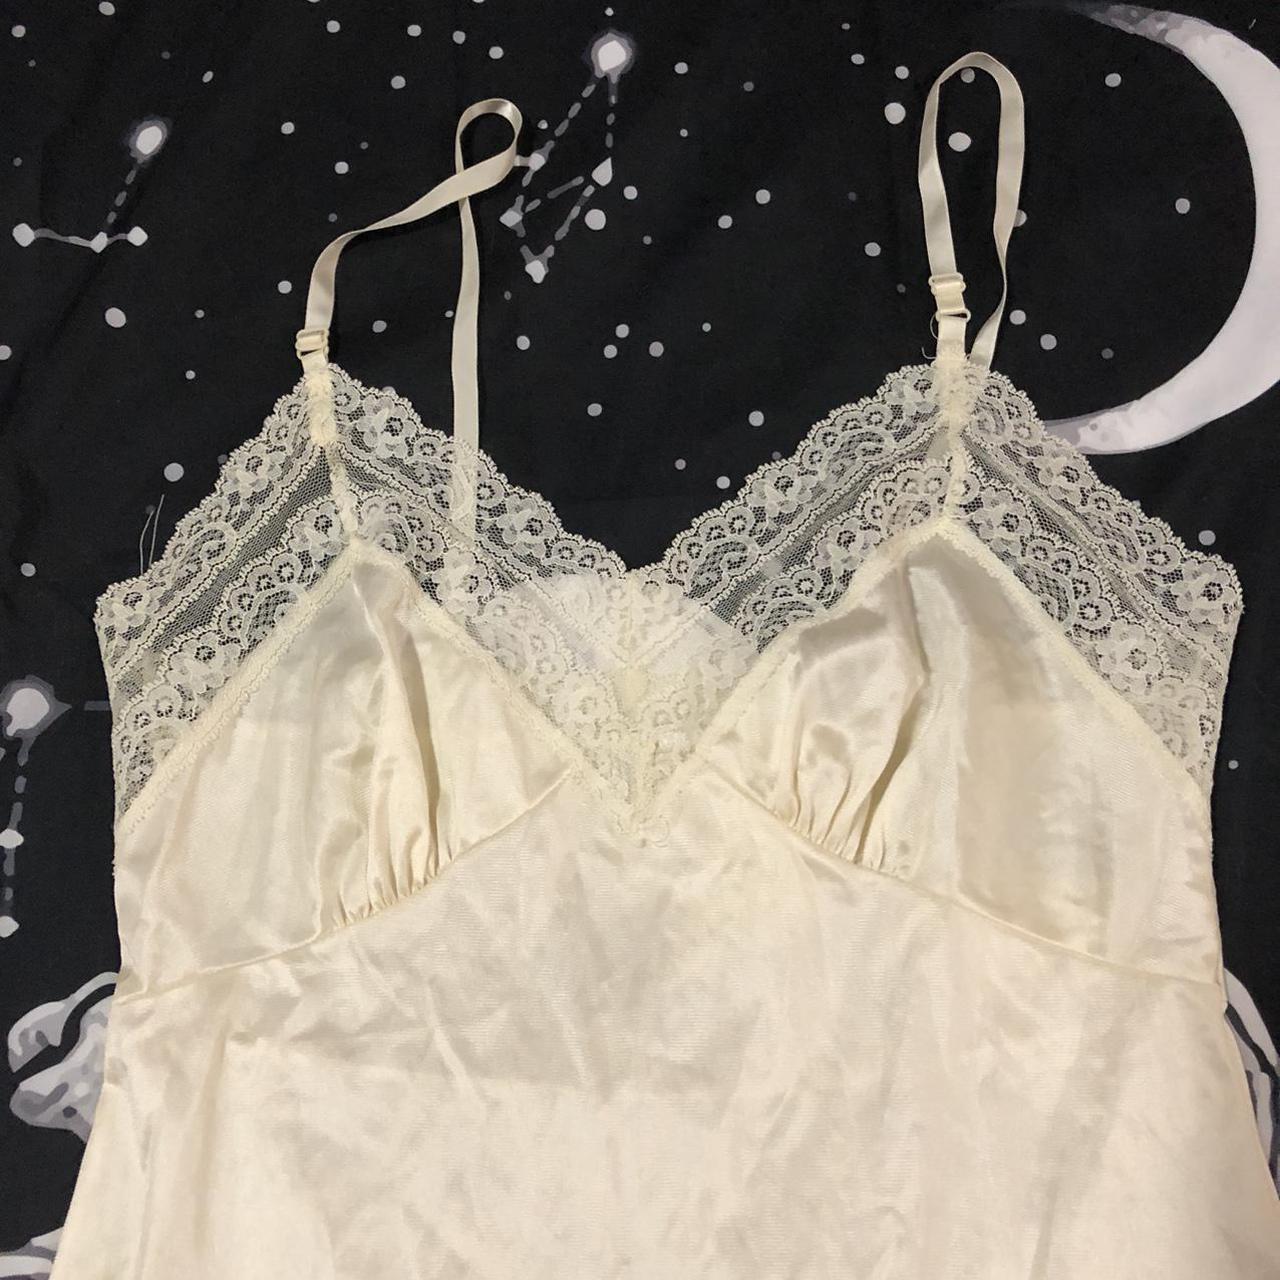 Product Image 2 - White slip dress lace nightgown